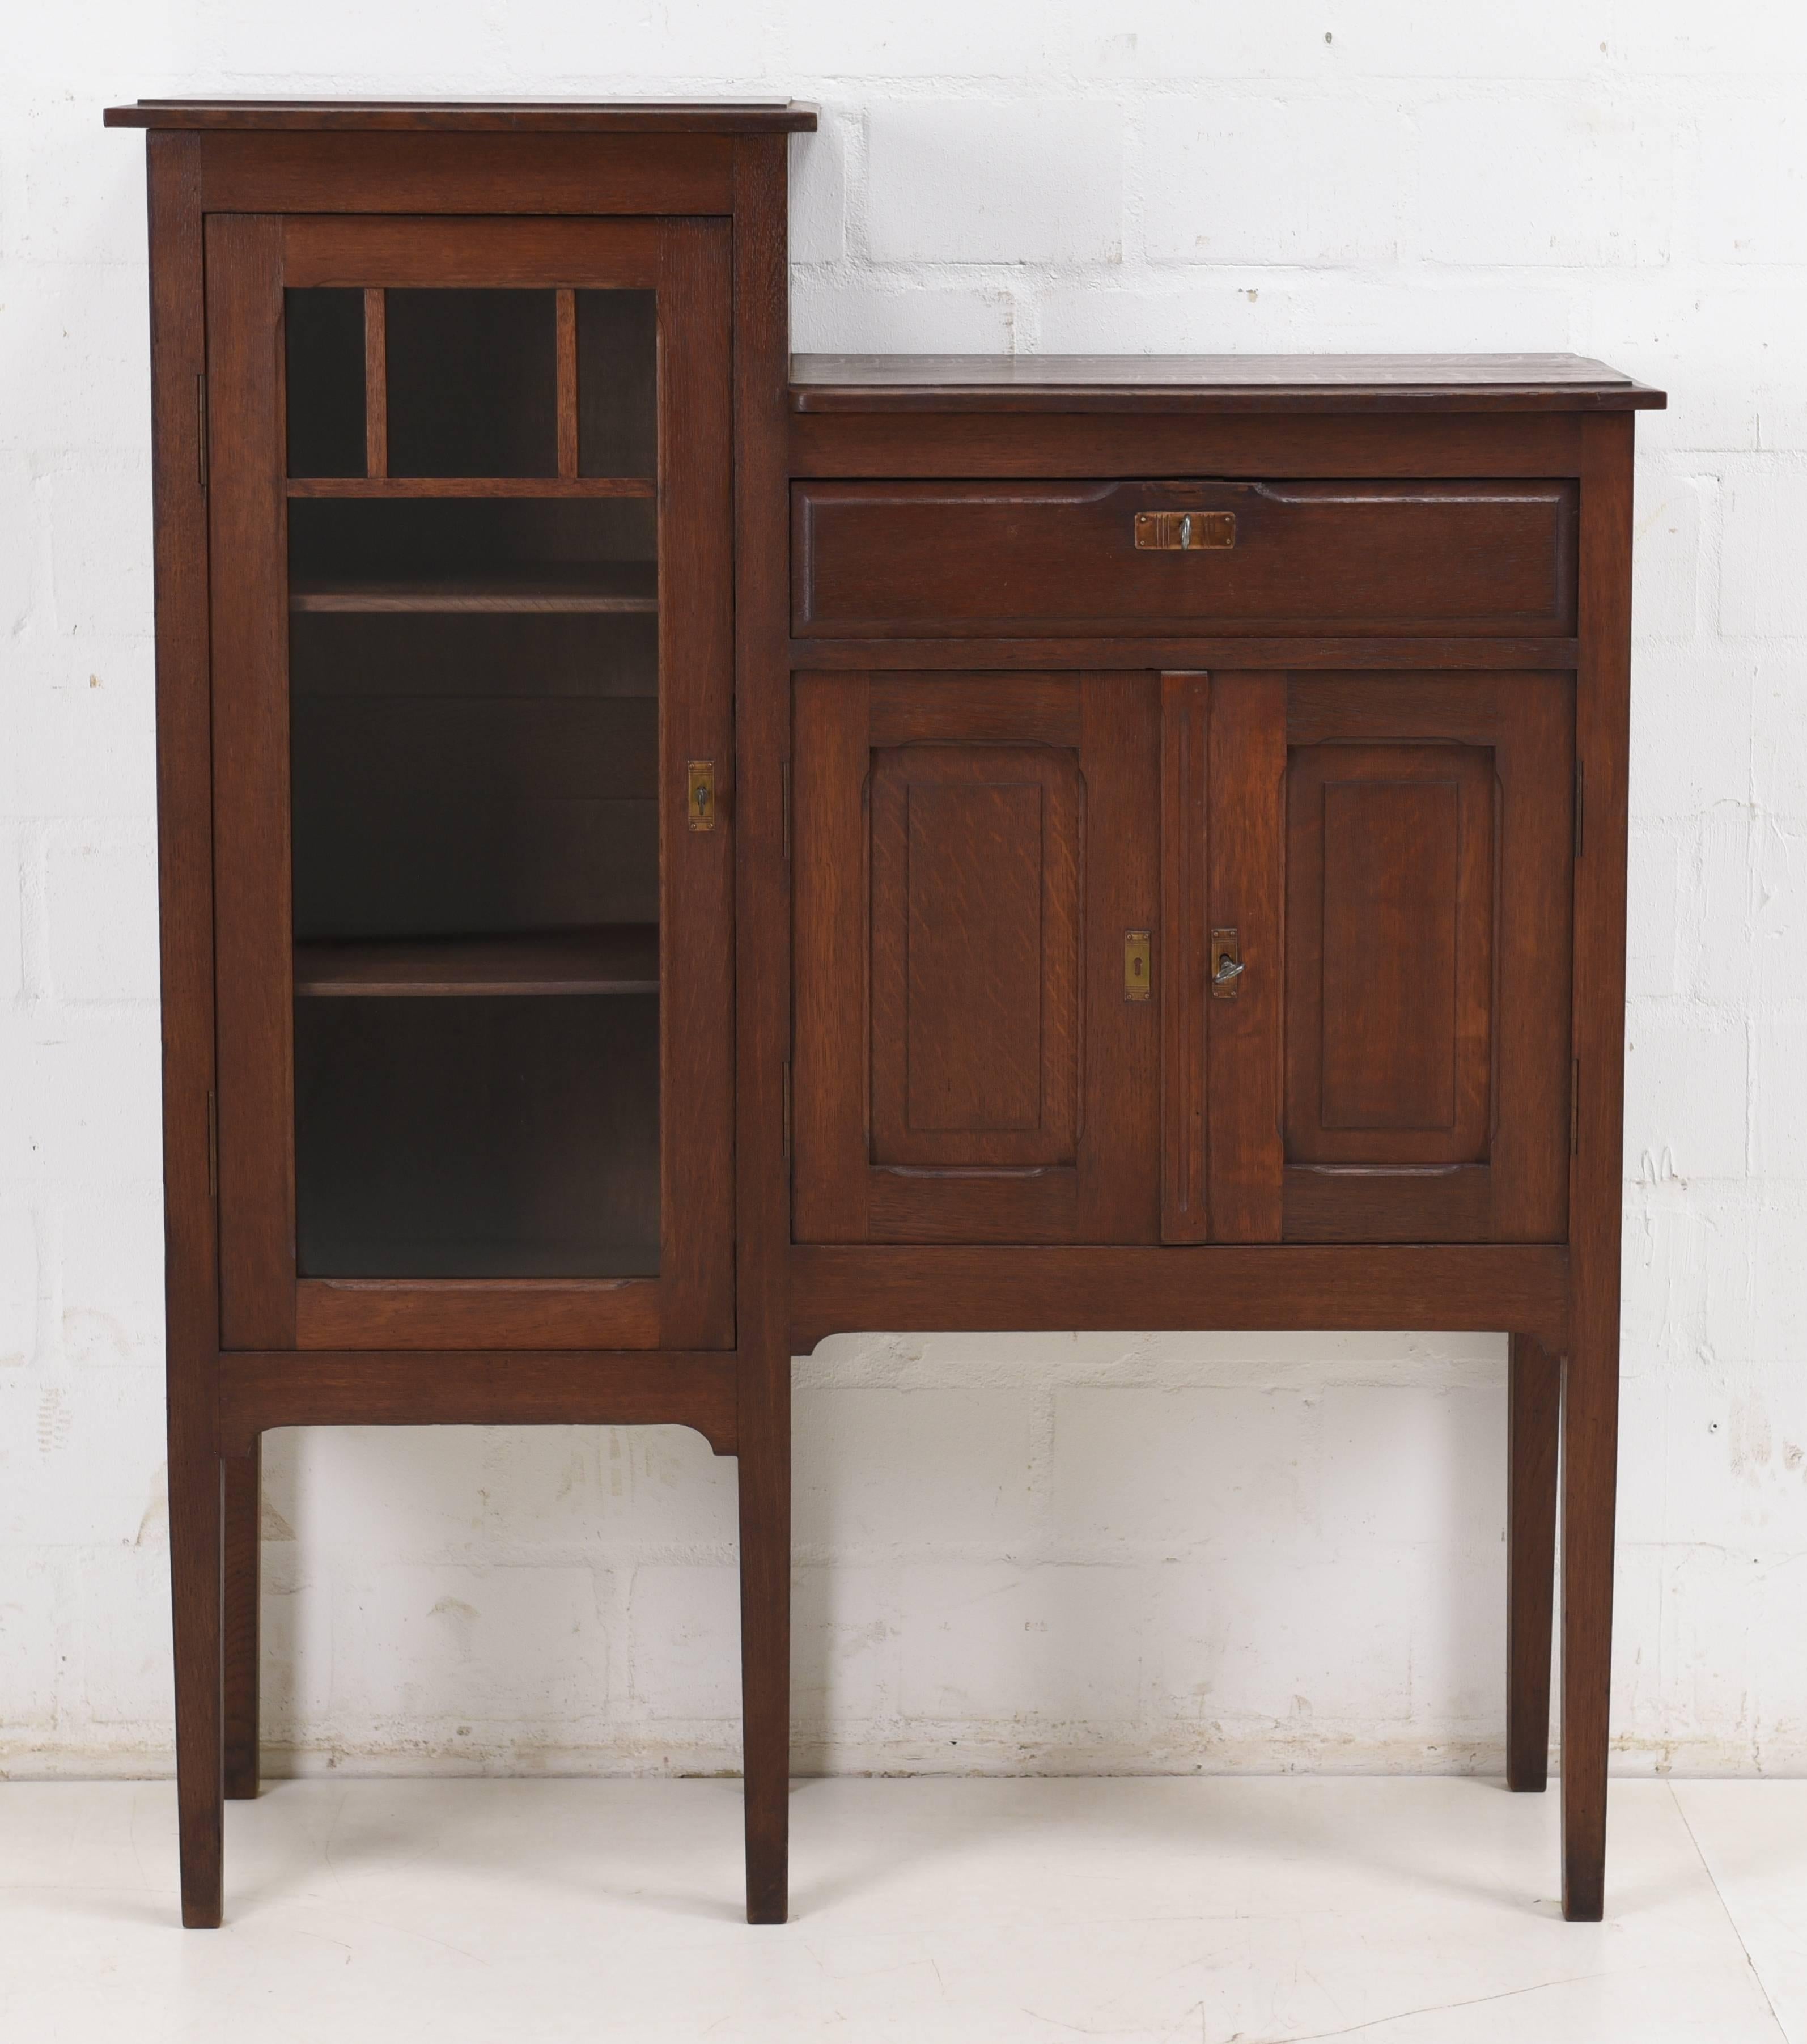 A small asymmetric display cabinet from the Art Nouveau era, circa 1915. The body is made of solid oak and the interior softwood and plywood. Original fittings at the doors with locks and keys. The shelves of the display unit are adjustable in